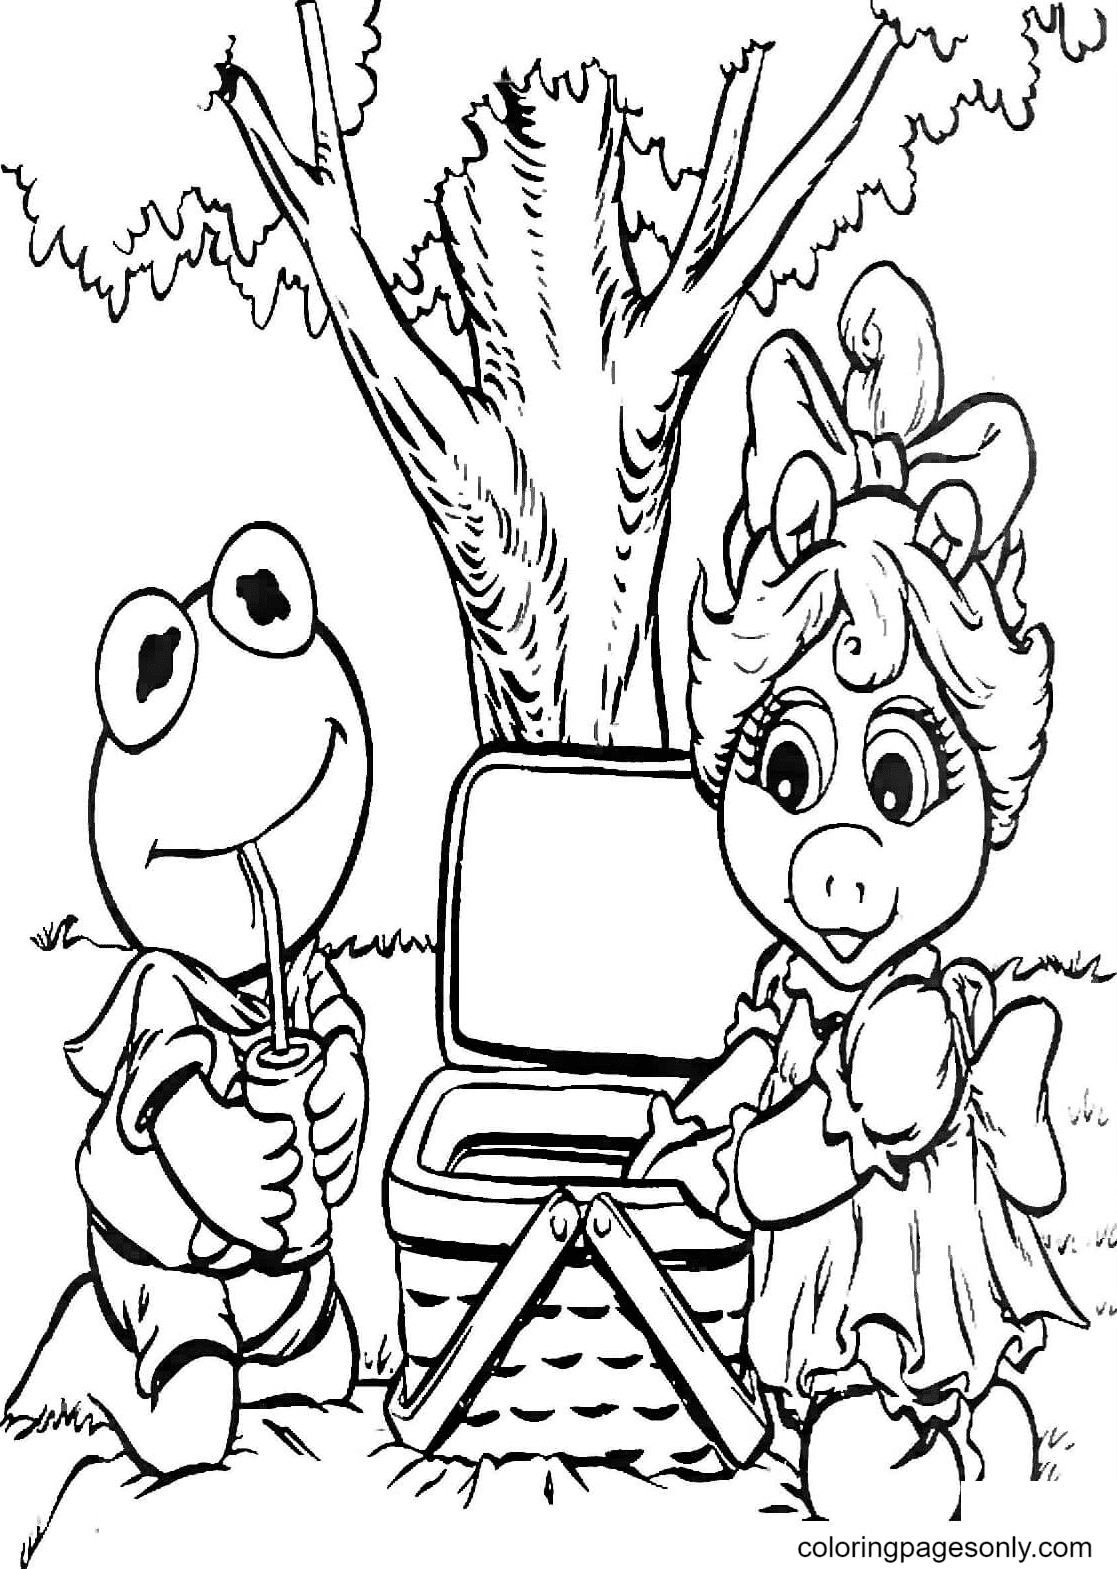 Kermit and Miss Piggy on a Picnic Coloring Page